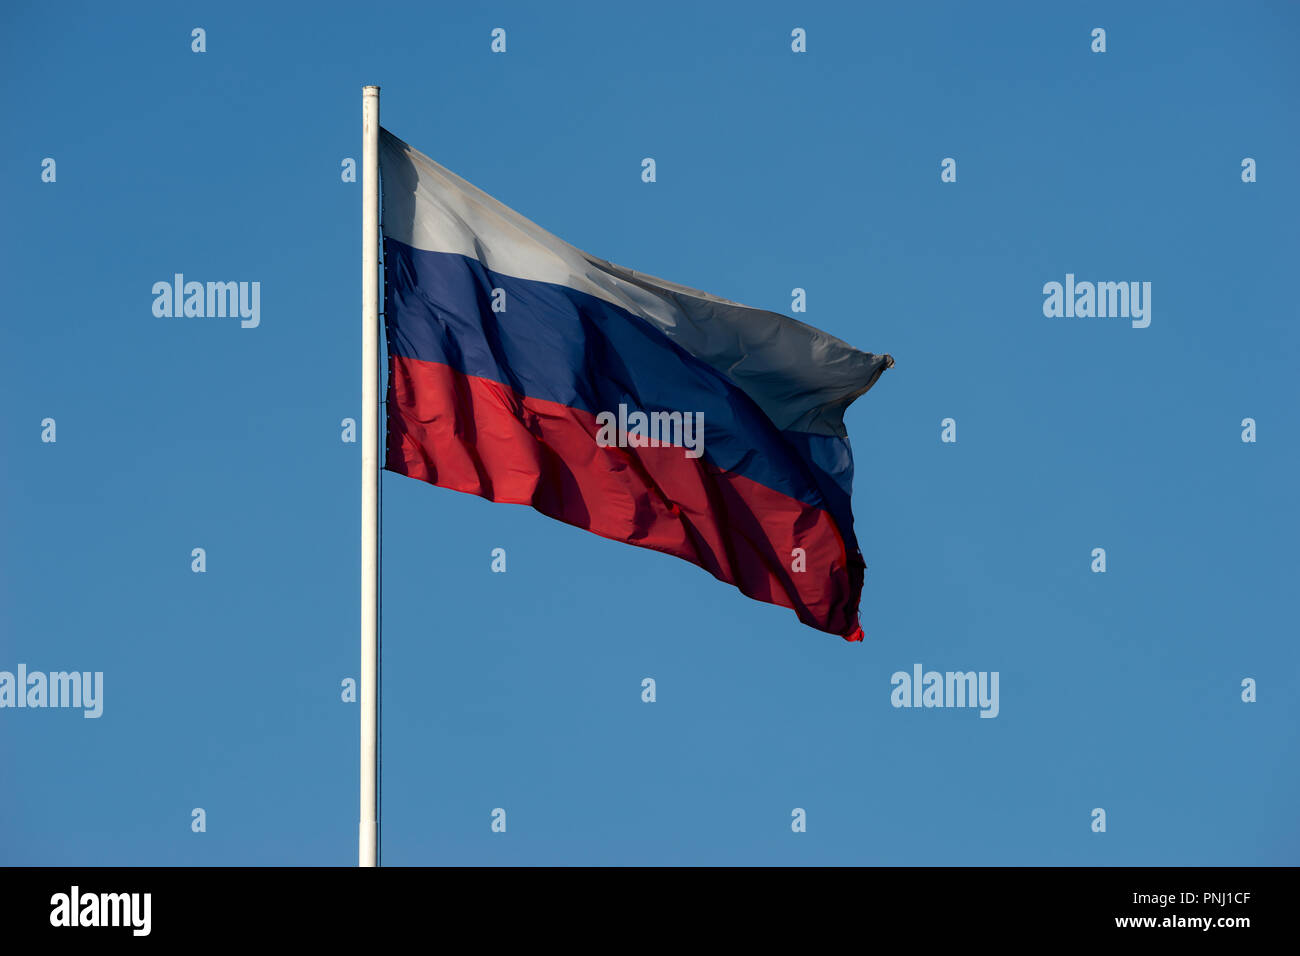 Russian flag of three colors red, blue, white waves in the wind against the background of clean and clear blue sky. Free space to enter text Stock Photo